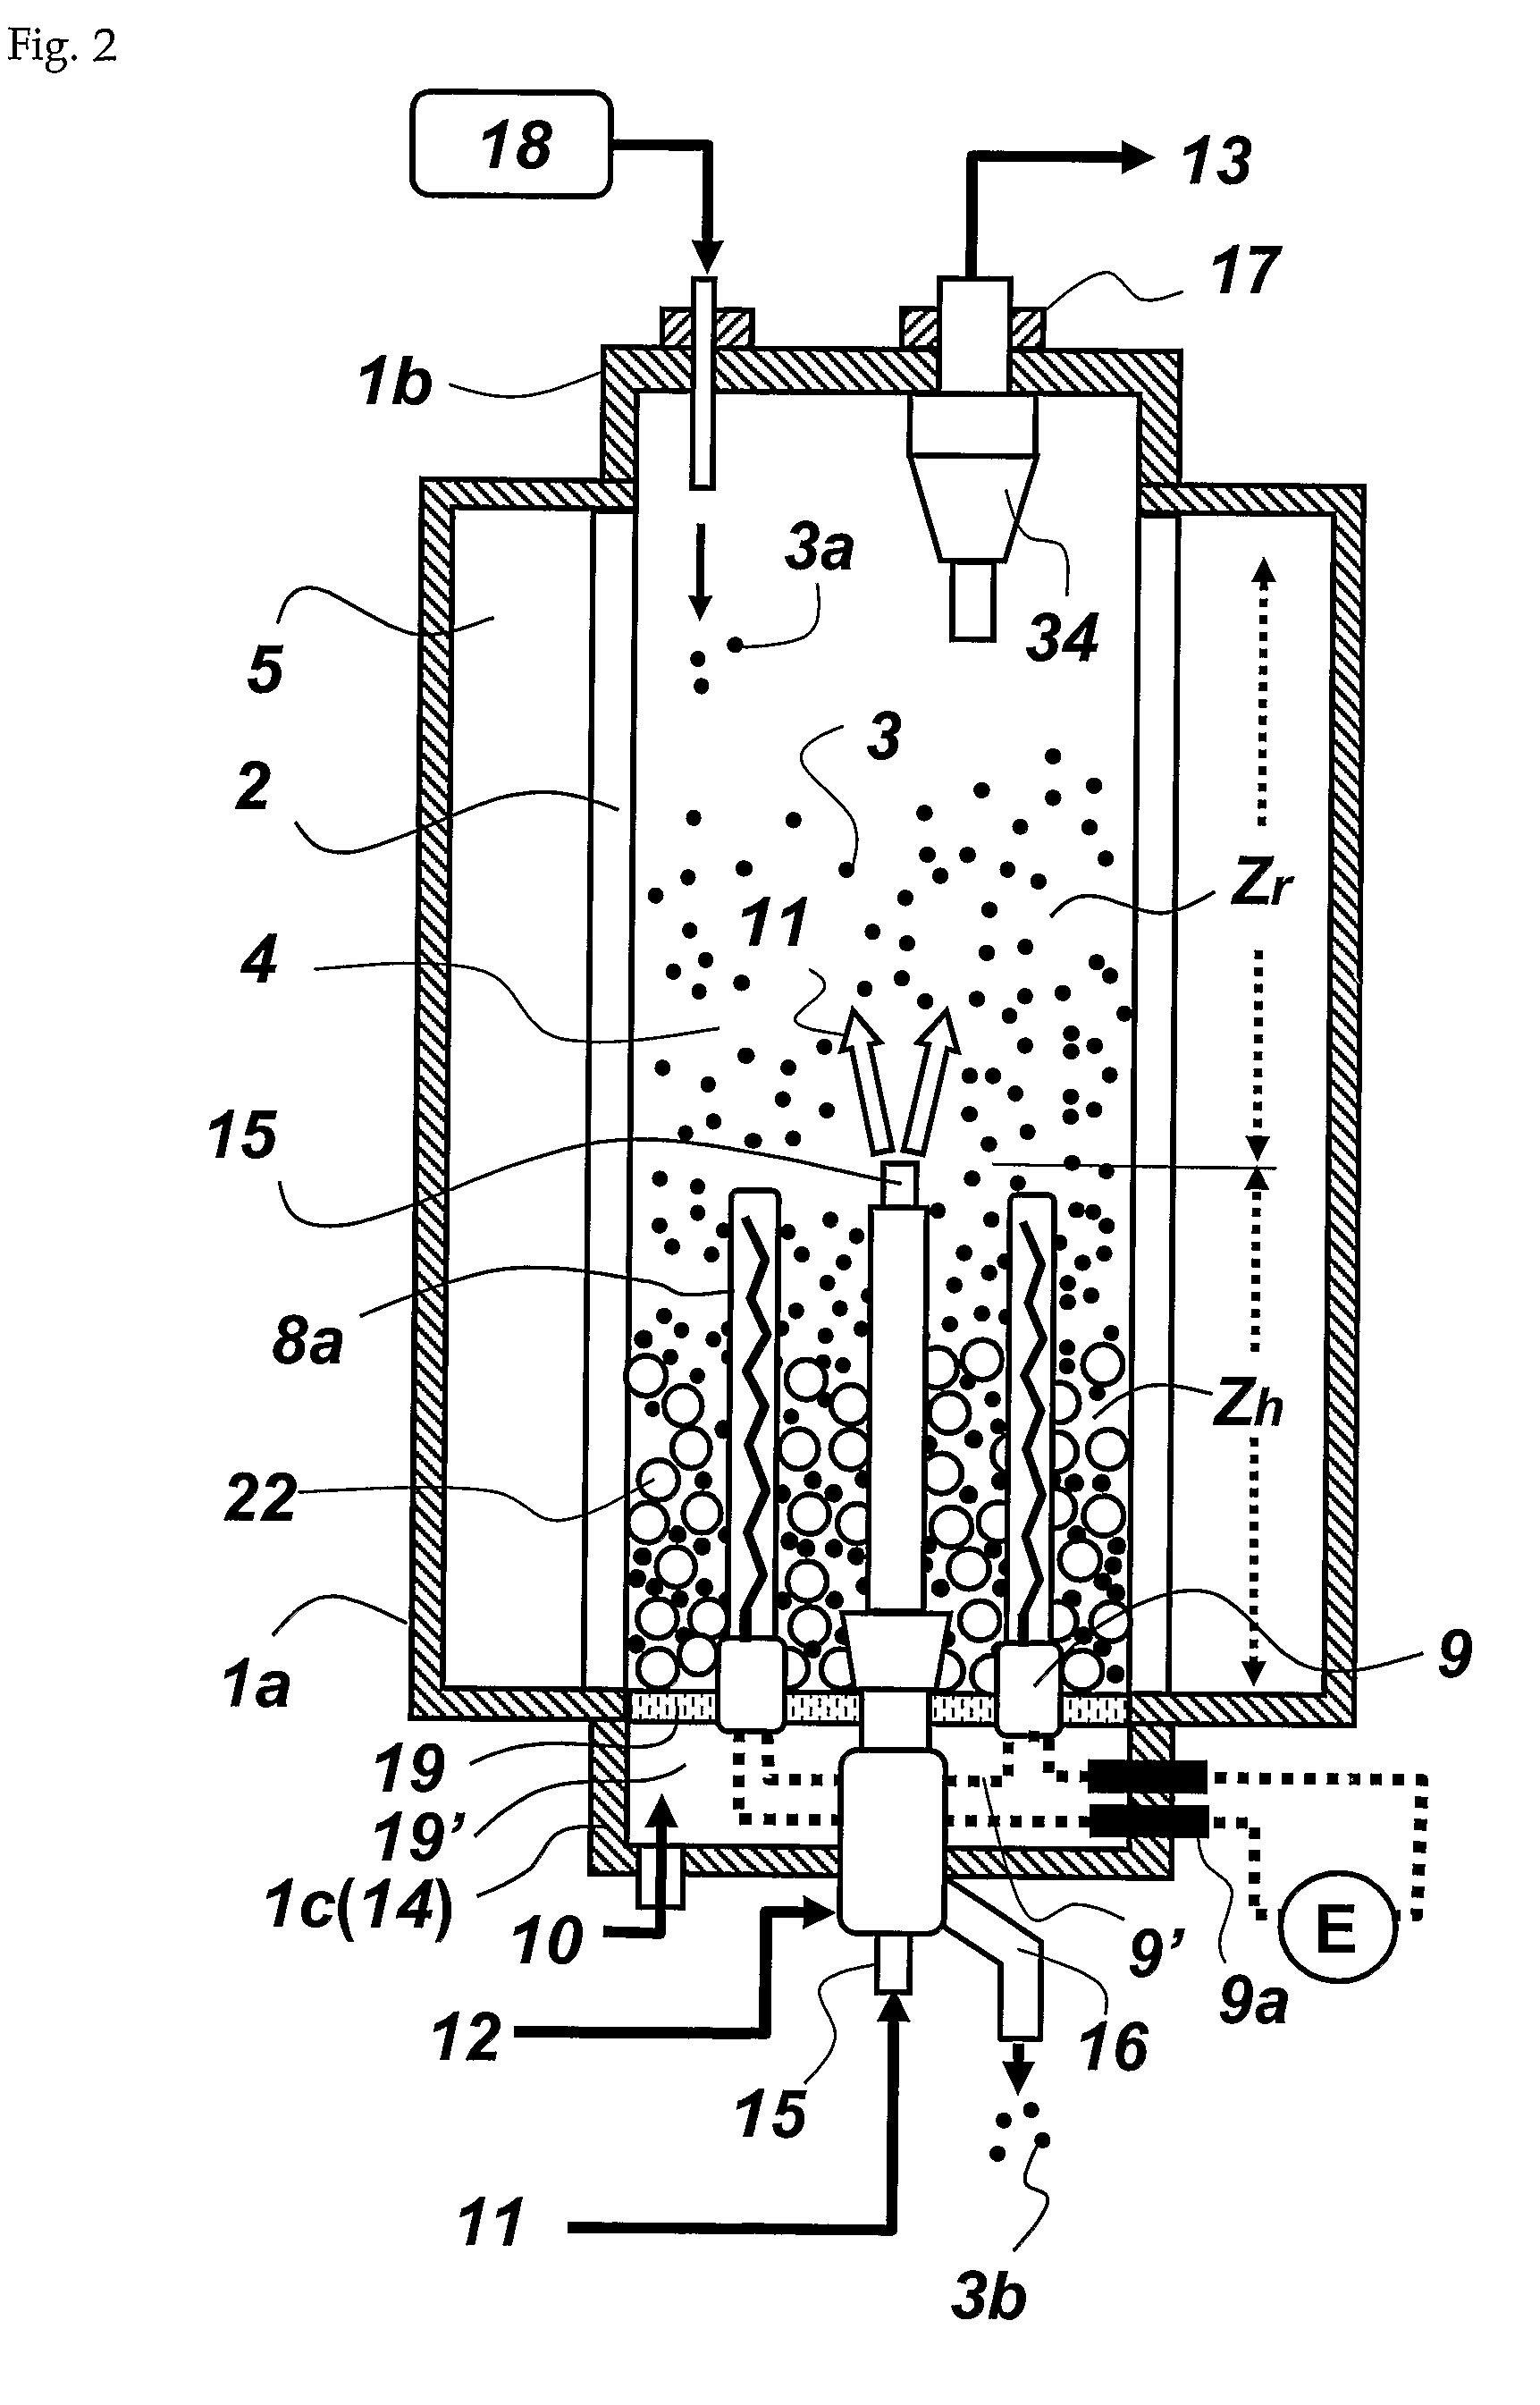 Method and Apparatus for Preparation of Granular Polysilicon